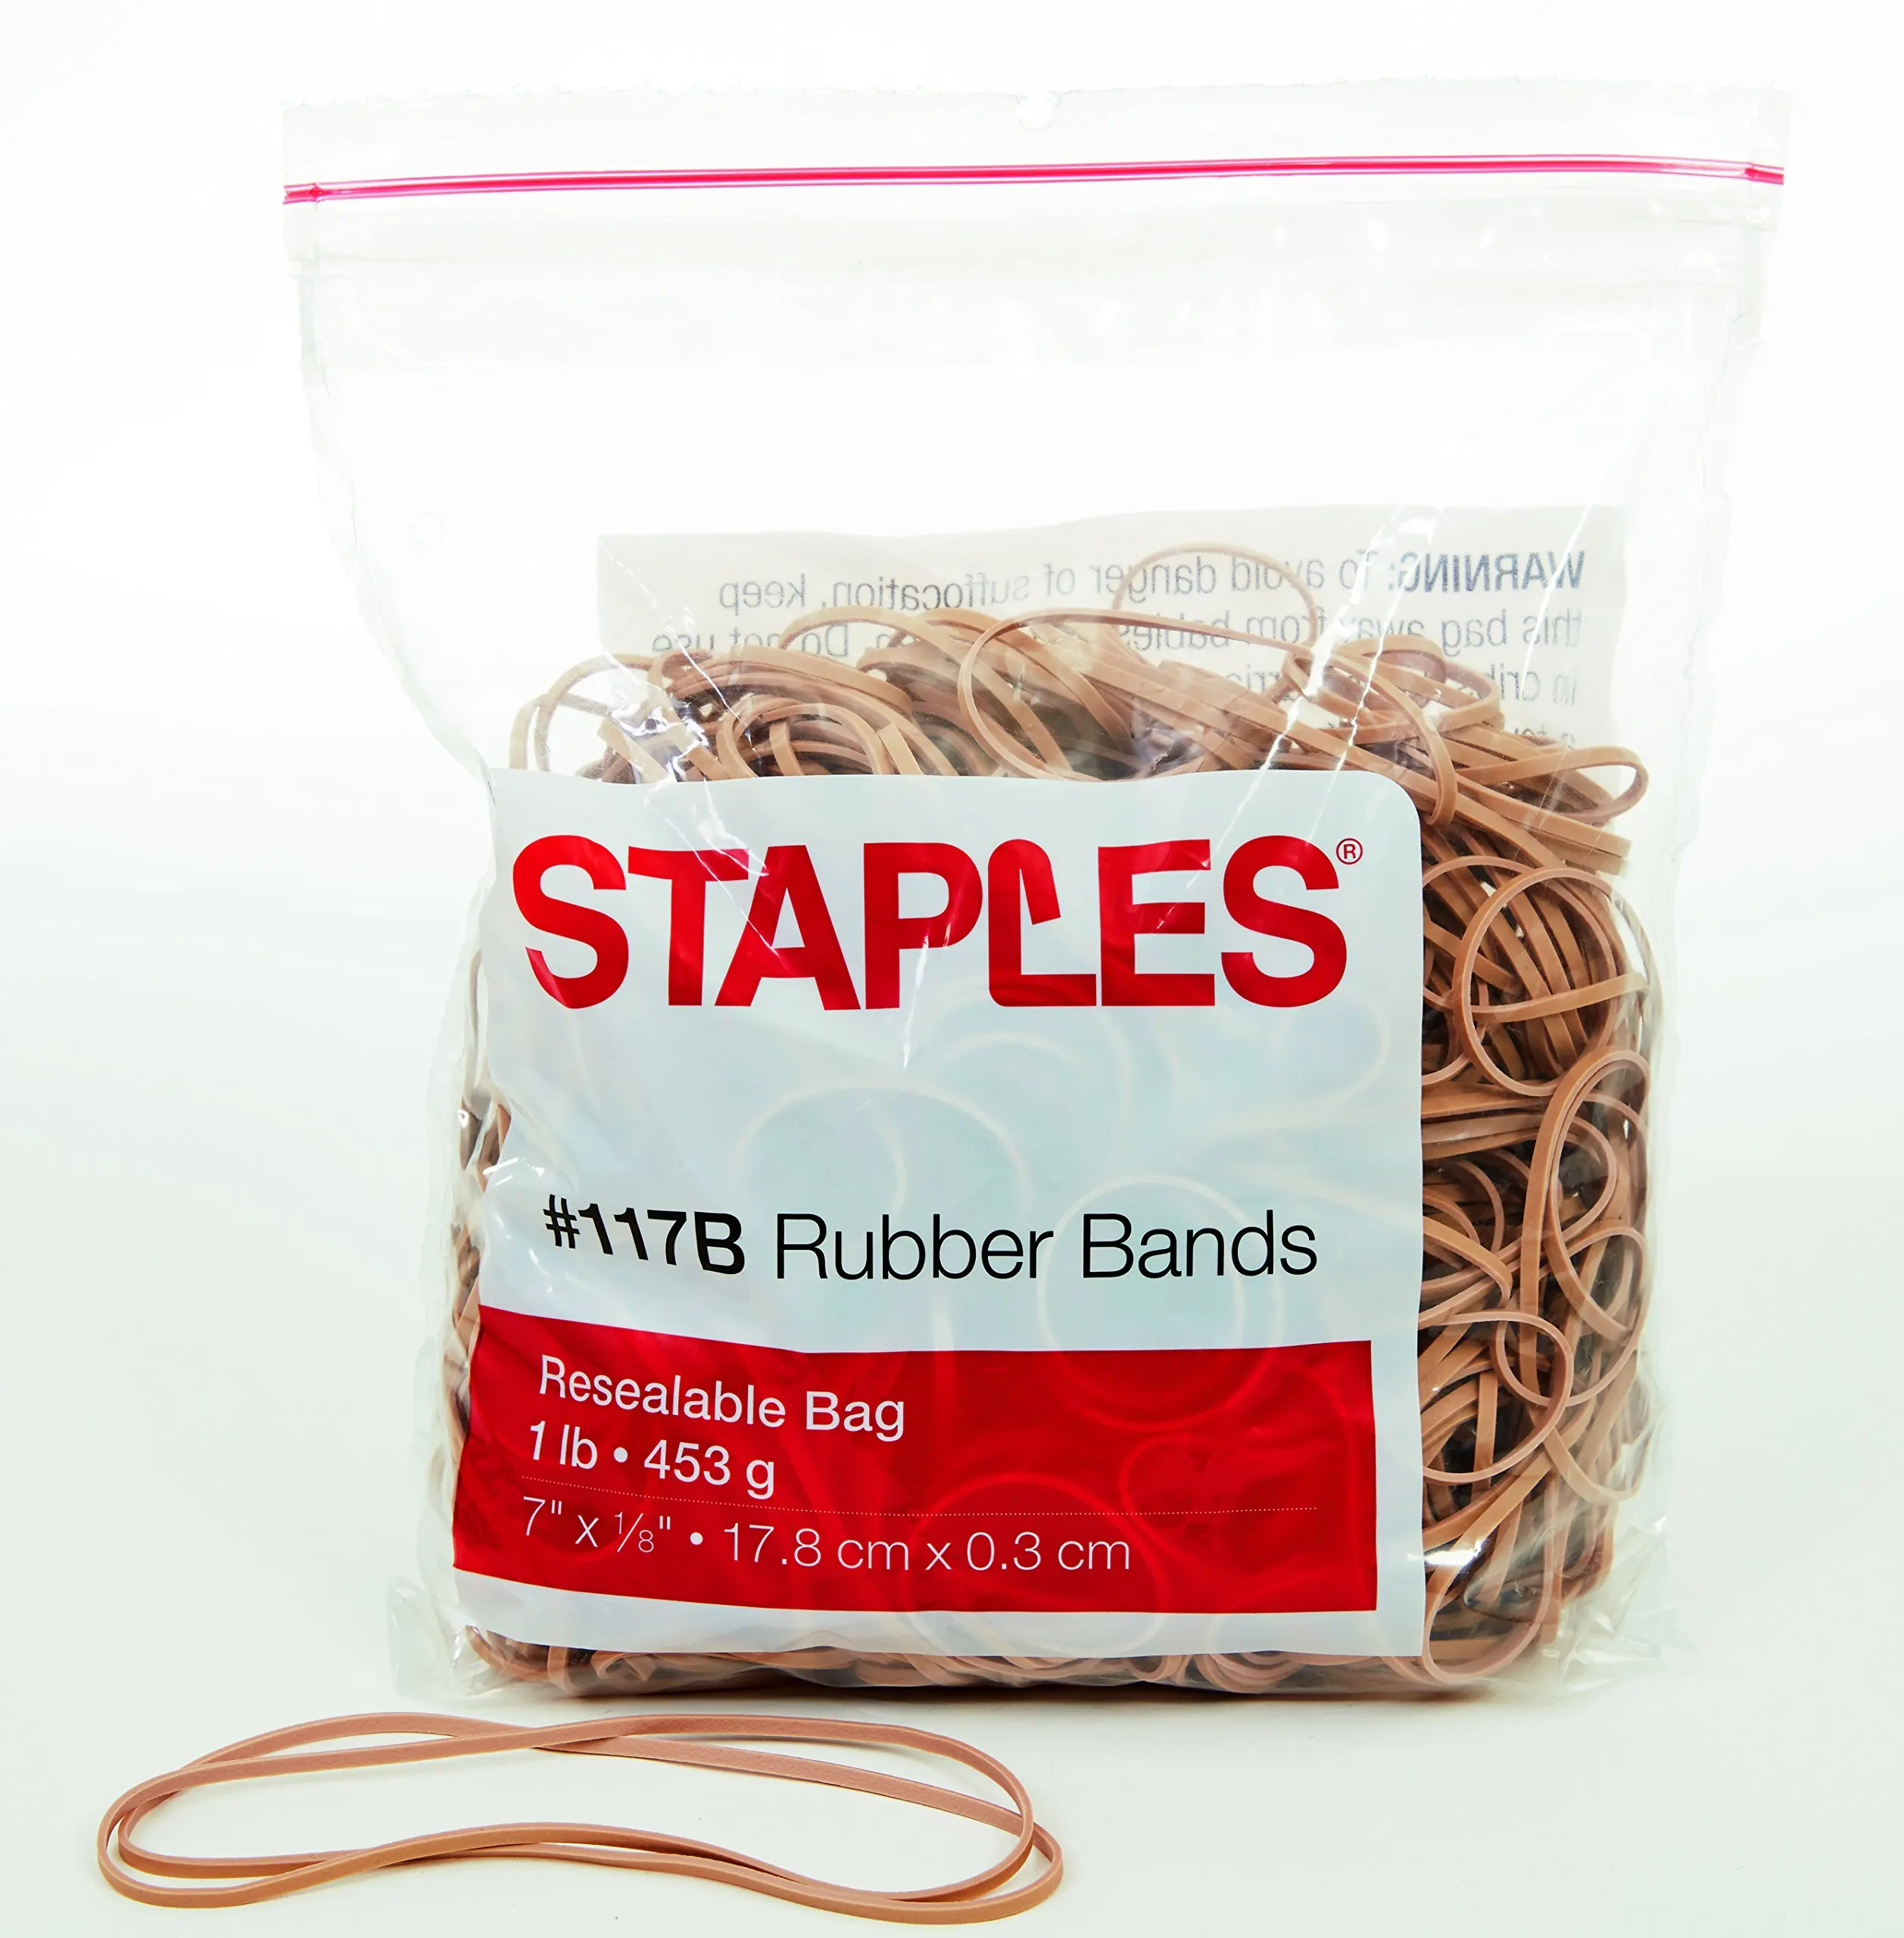 size 37 rubber bands